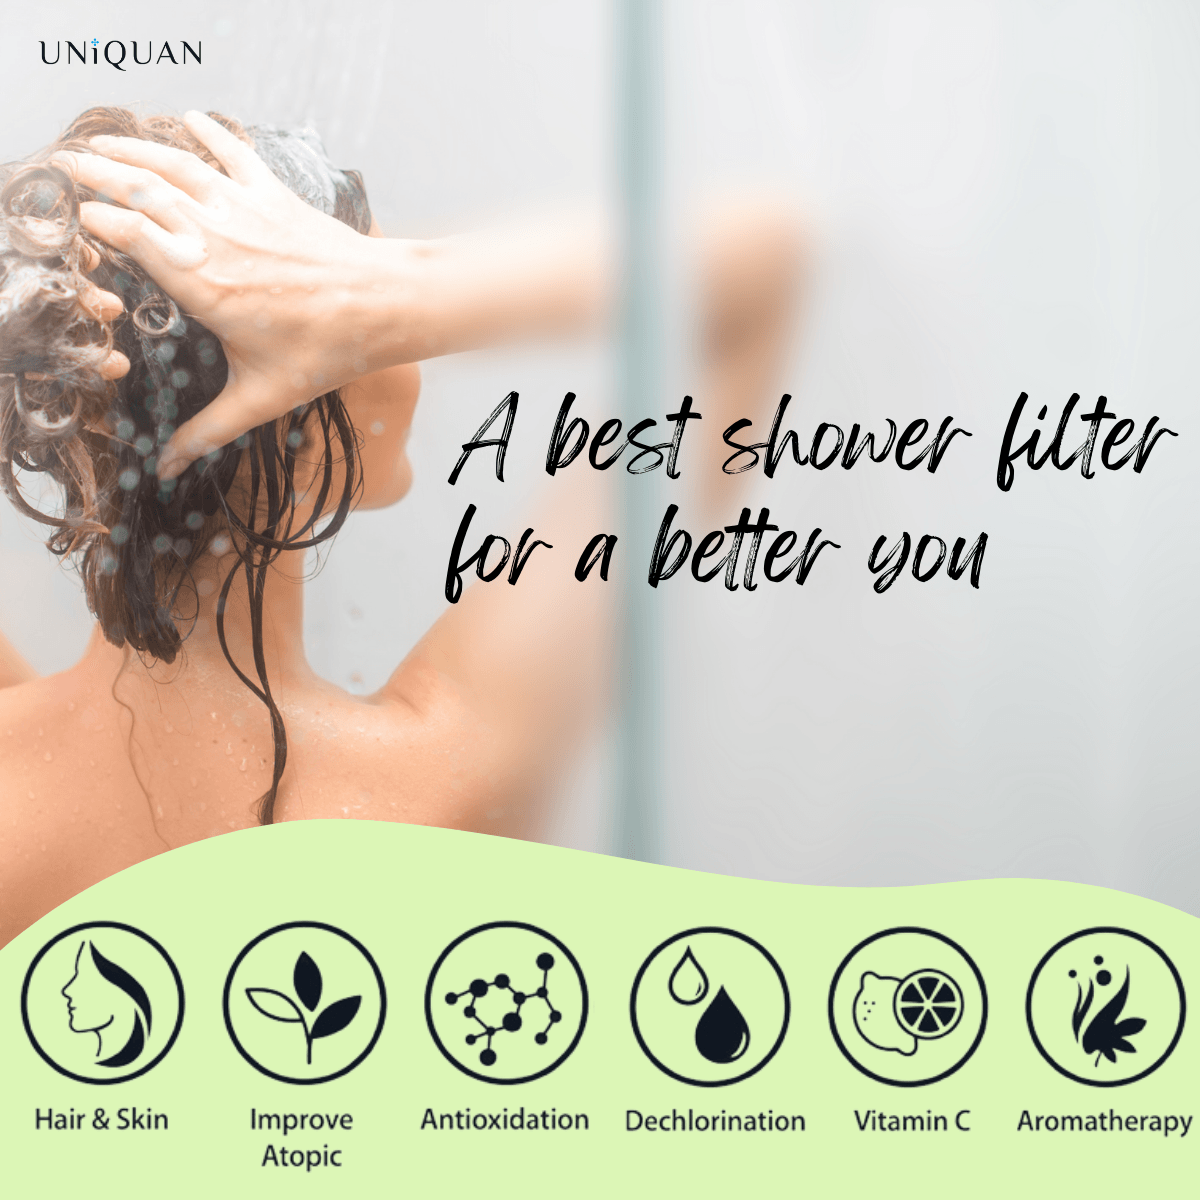 Uniquan Vitamin Shower Filter - Forest - UShops, High-efficiency Water Filter, Health Protection, Improved Skin & Hair